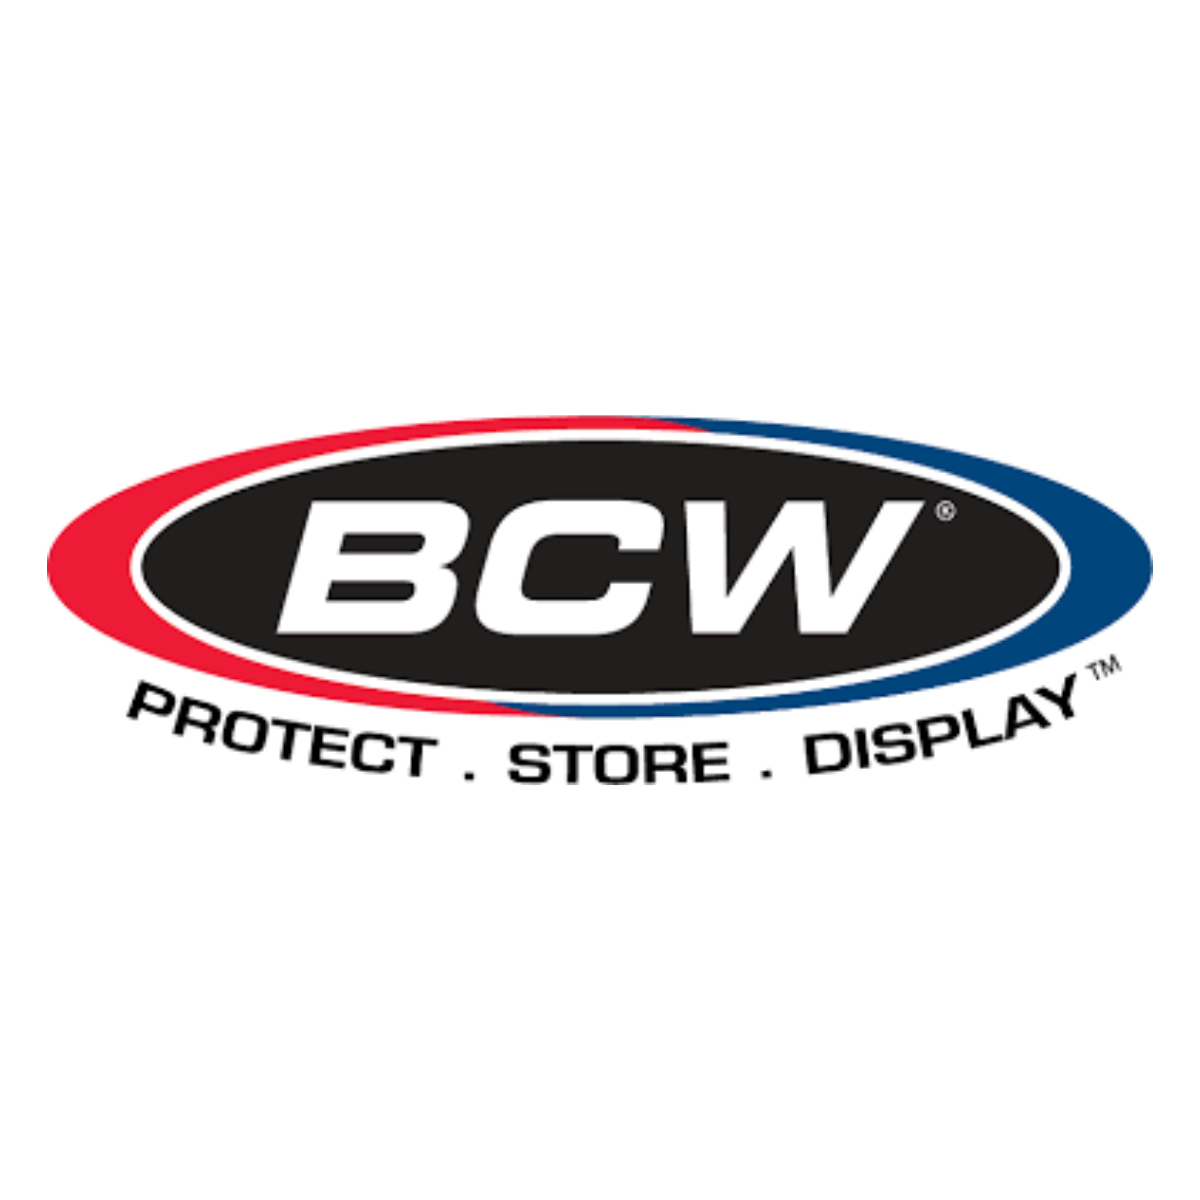 BCW Sideloading Inner Sleeves-BCW Supplies-Ace Cards &amp; Collectibles